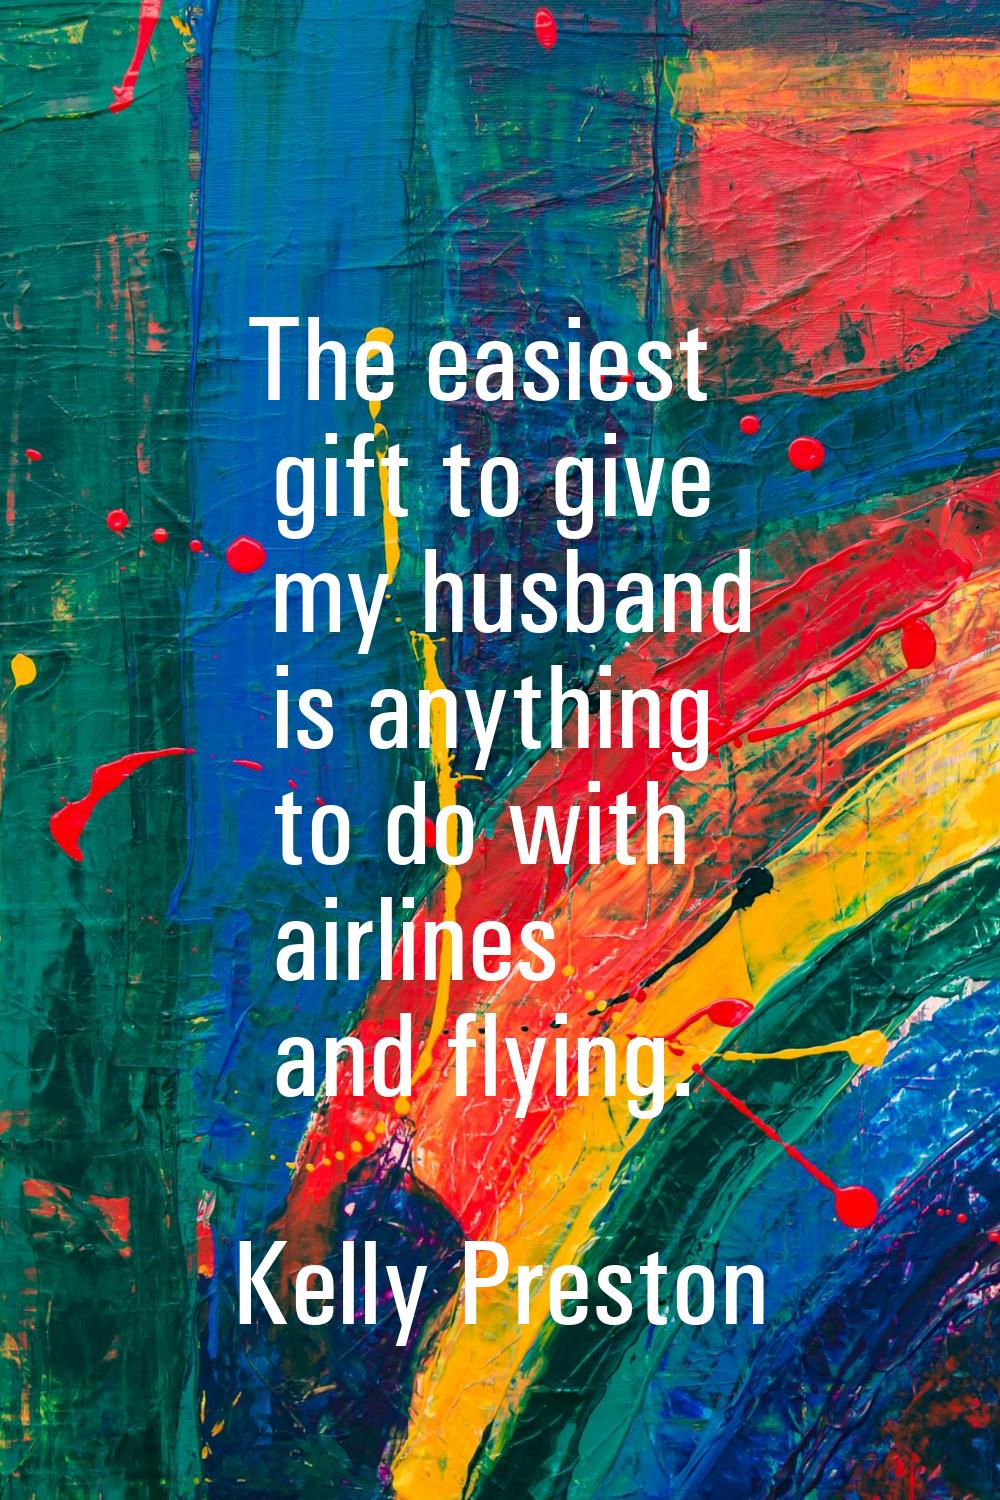 The easiest gift to give my husband is anything to do with airlines and flying.